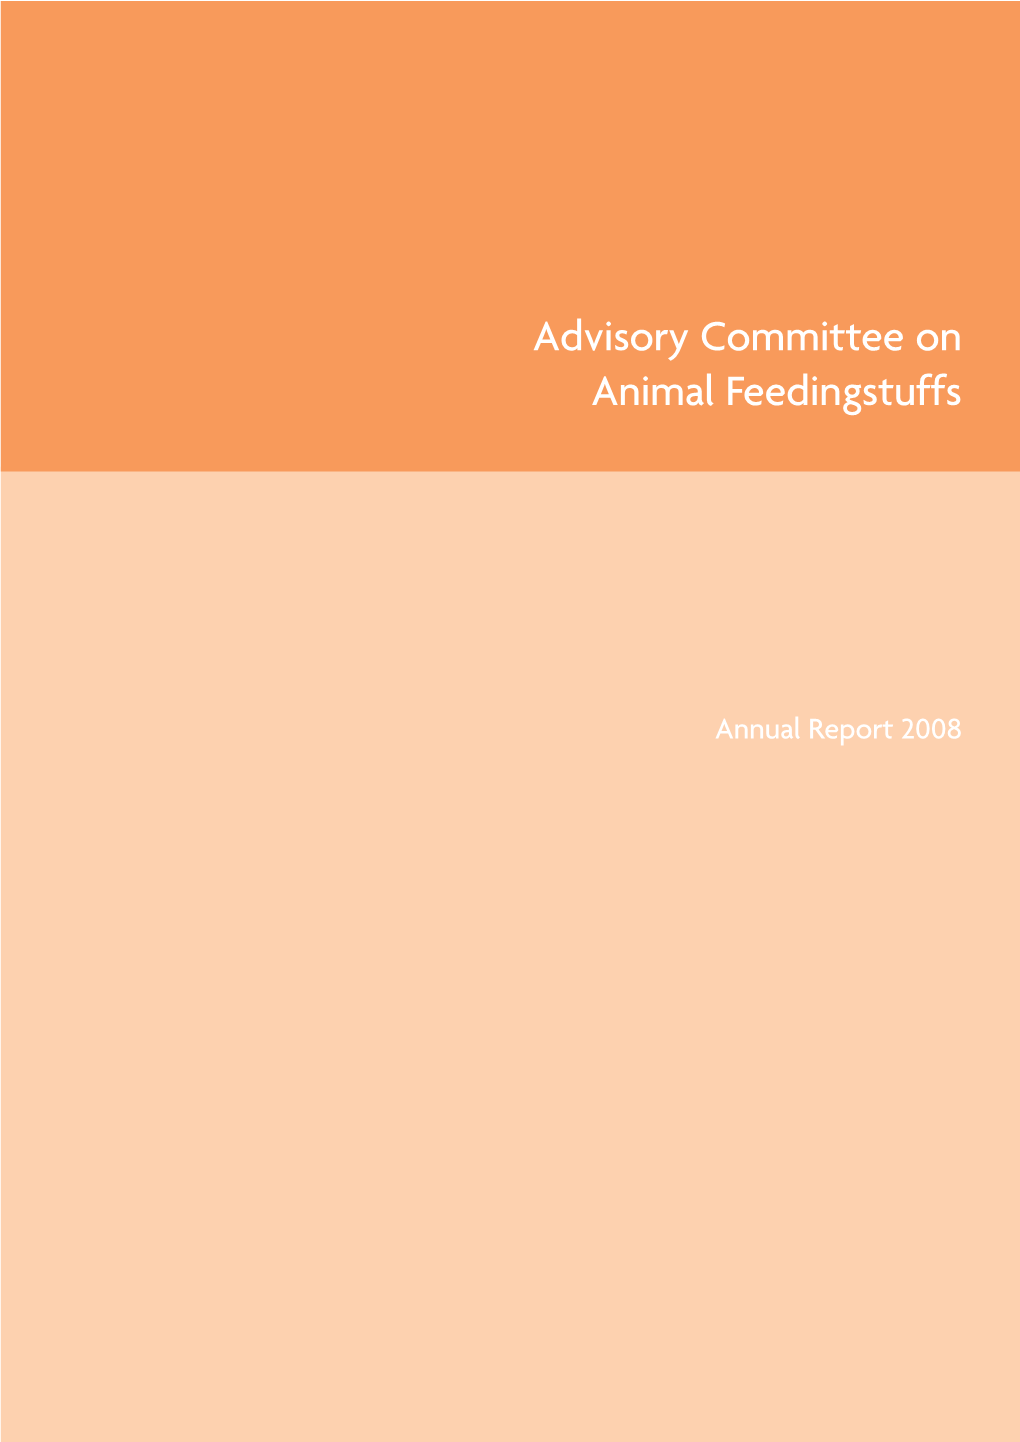 NEW ACAF Annual Report